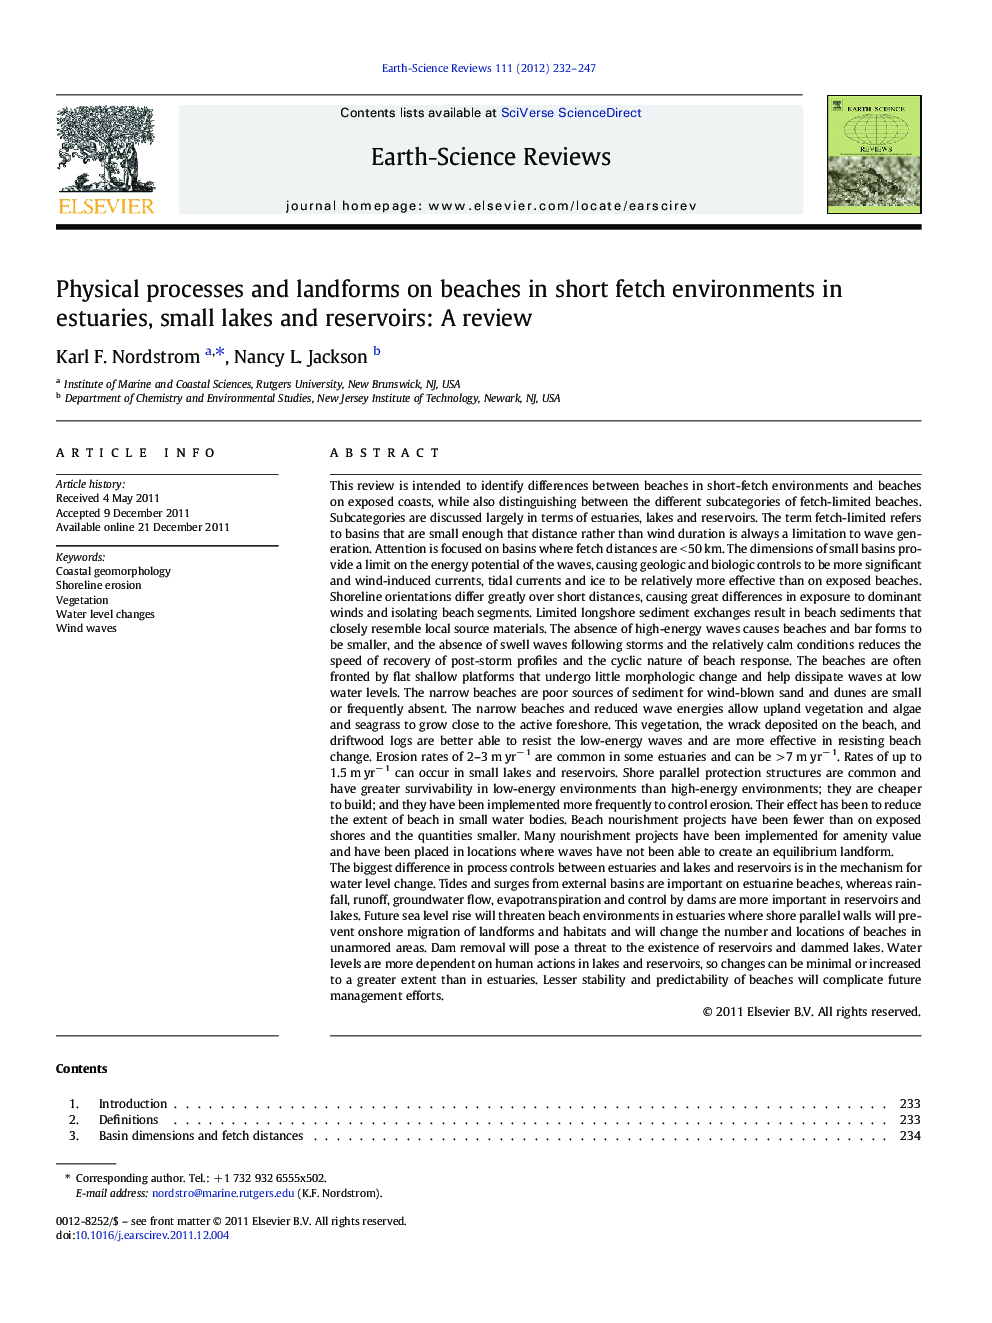 Physical processes and landforms on beaches in short fetch environments in estuaries, small lakes and reservoirs: A review